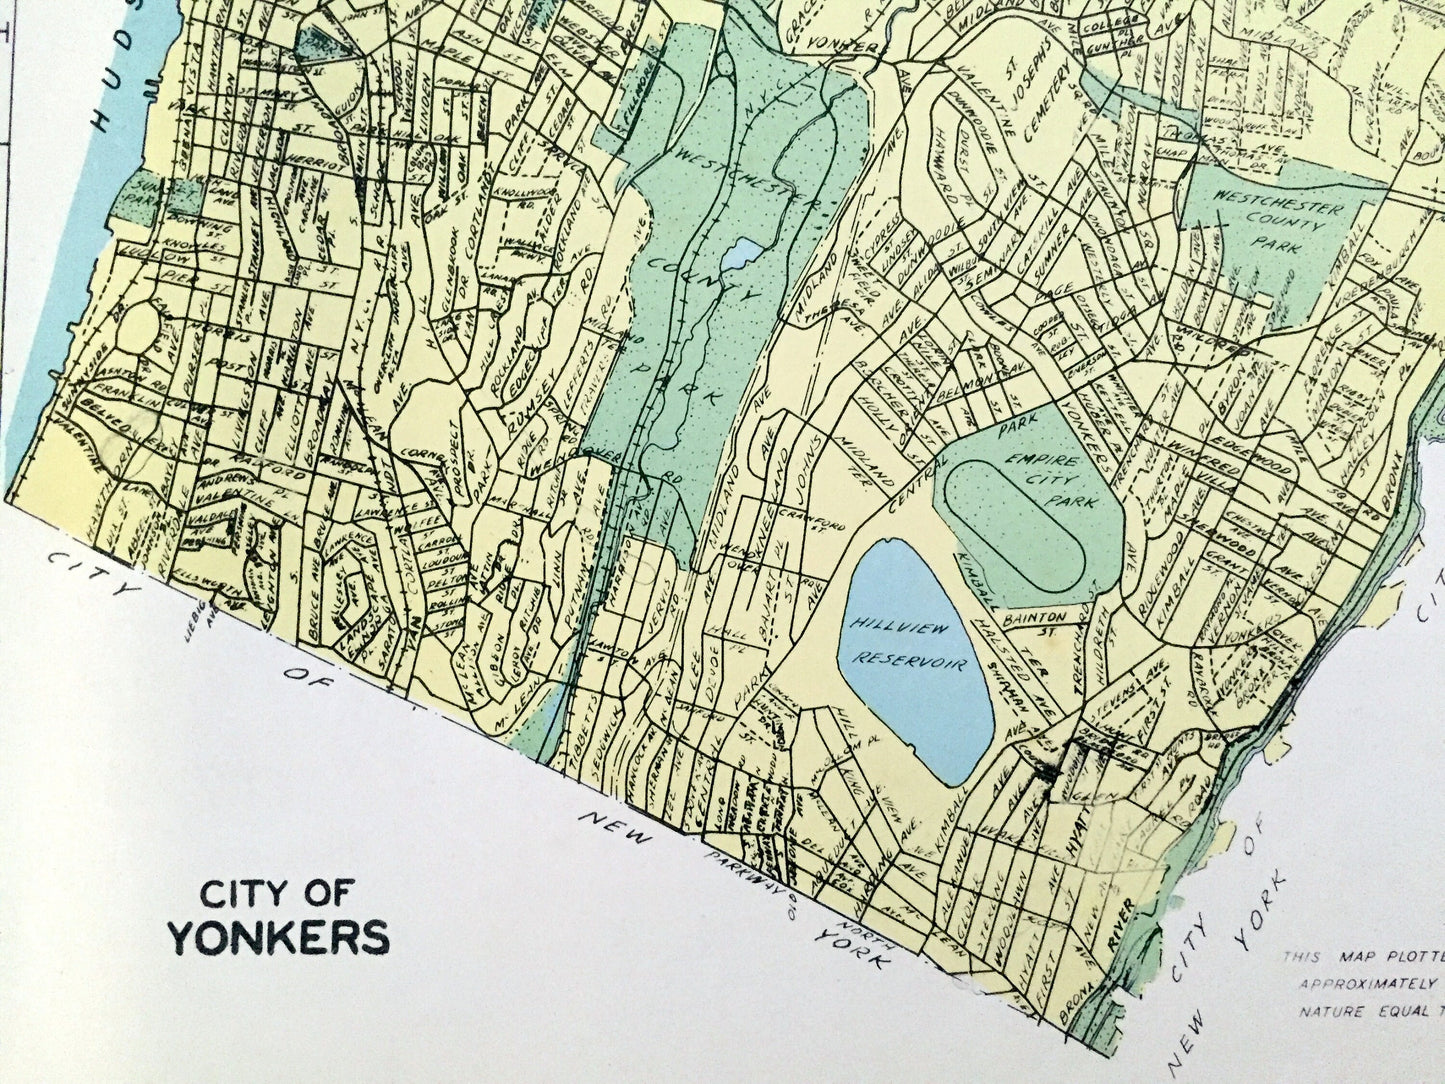 Antique Yonkers, Rensselaer & Mechanicville, New York 1941 Historical Atlas City Street Map – Hudson River Valley, Westchester County, NY